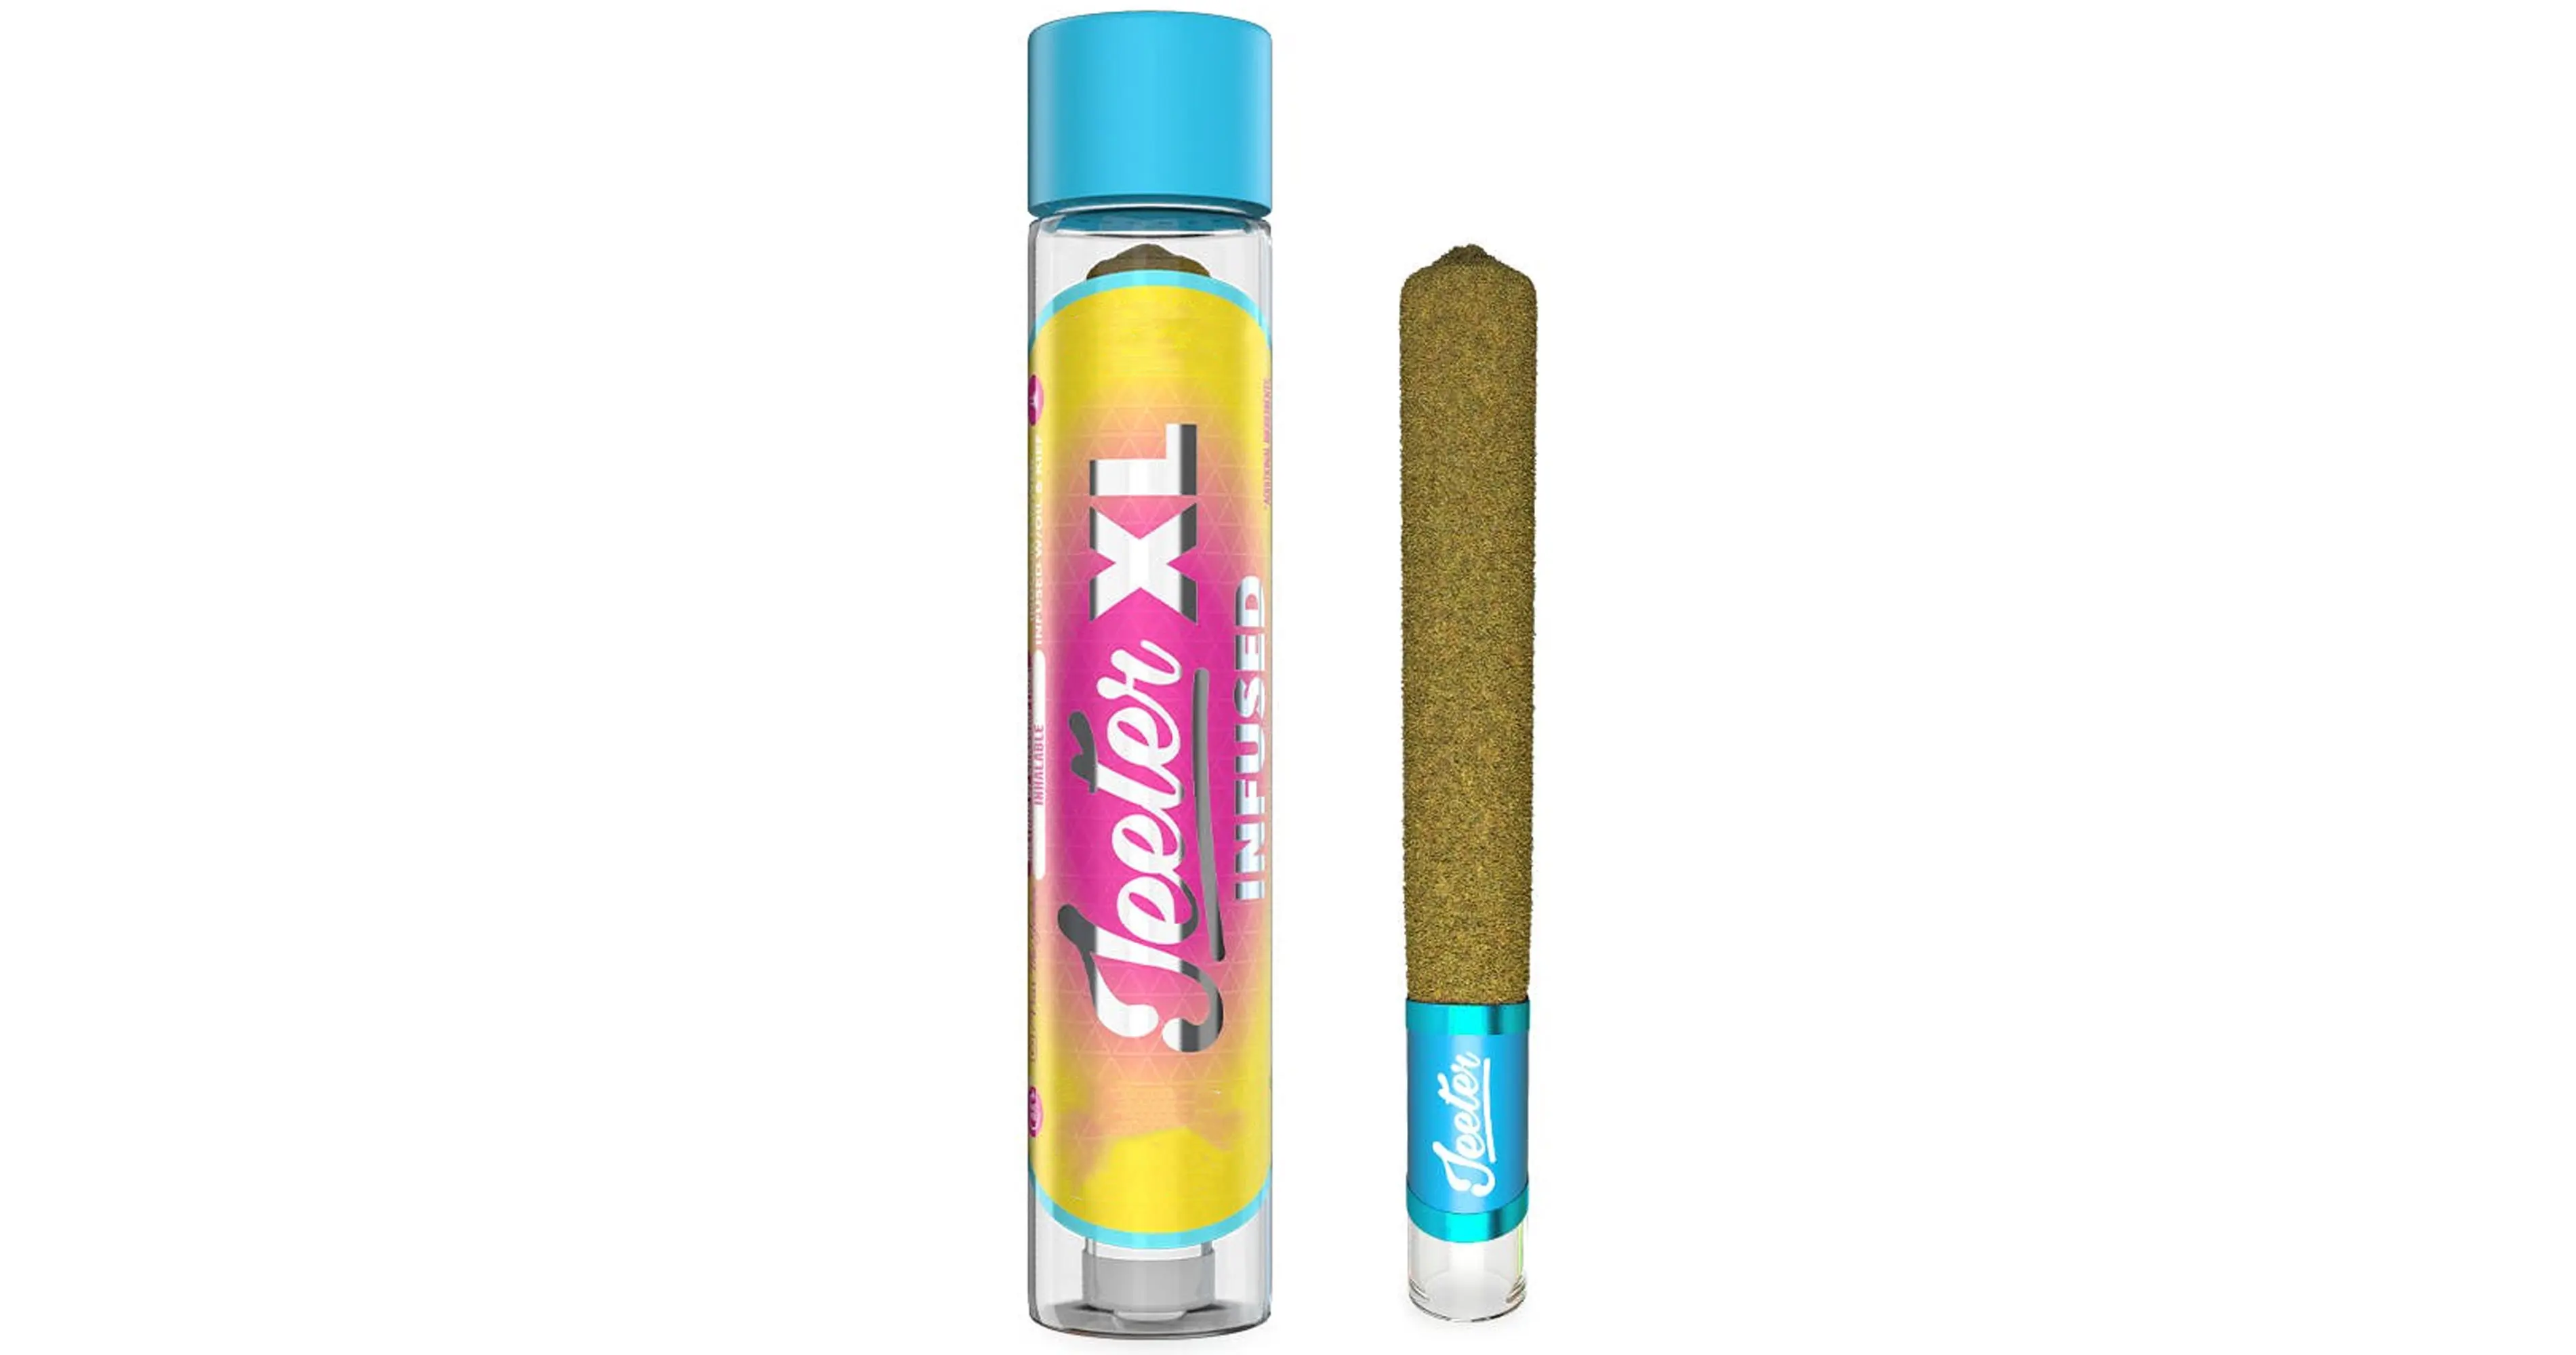 High Tide XL Infused Pre-Roll